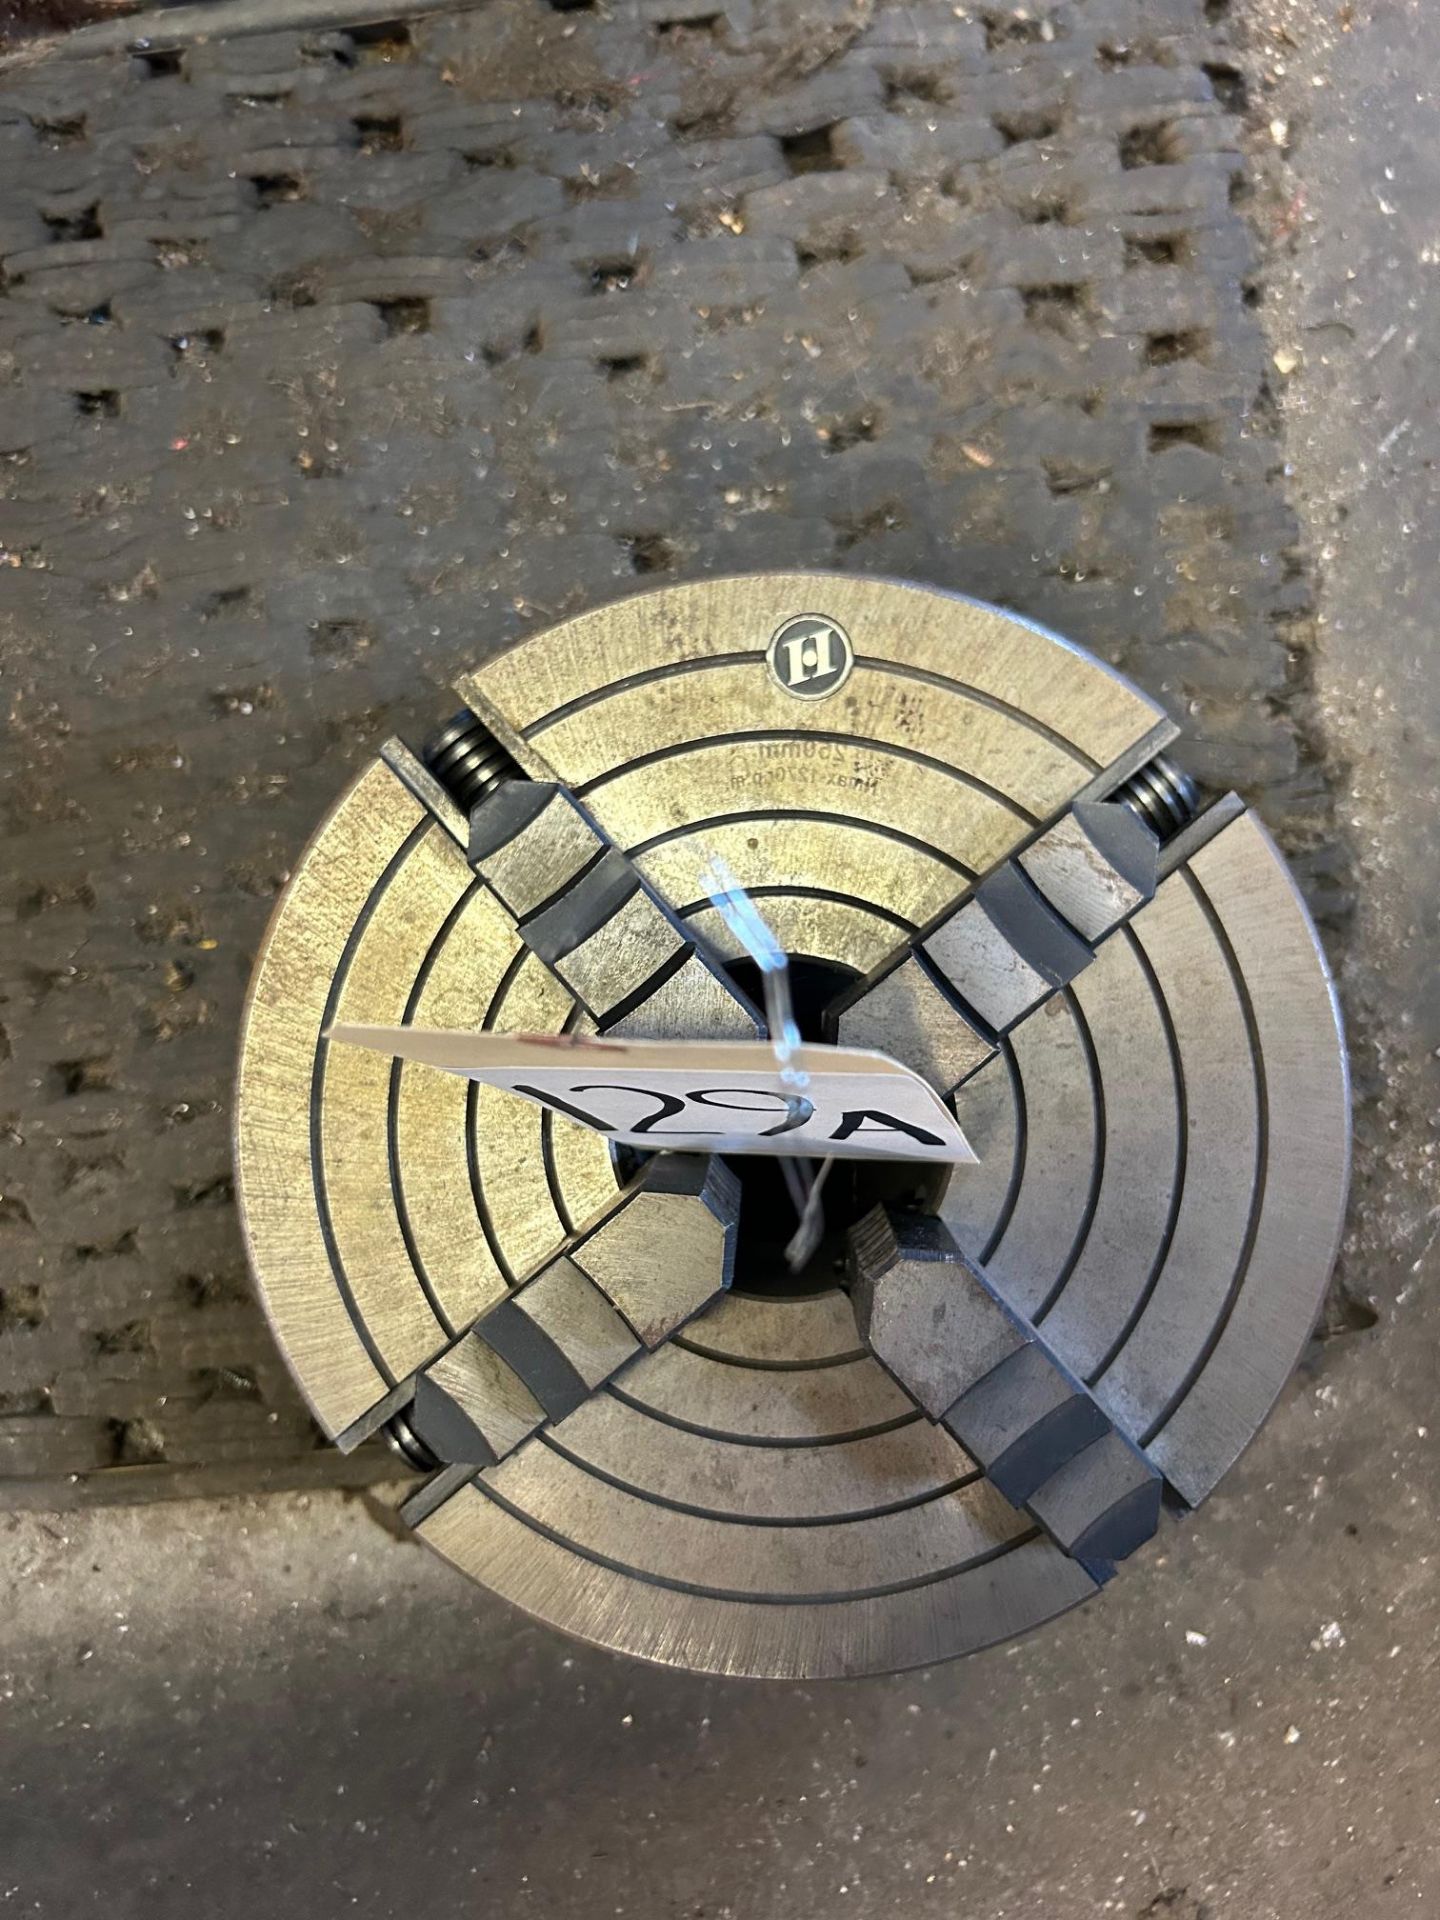 4-Jaw Chuck for Millport Lathe - Image 2 of 6